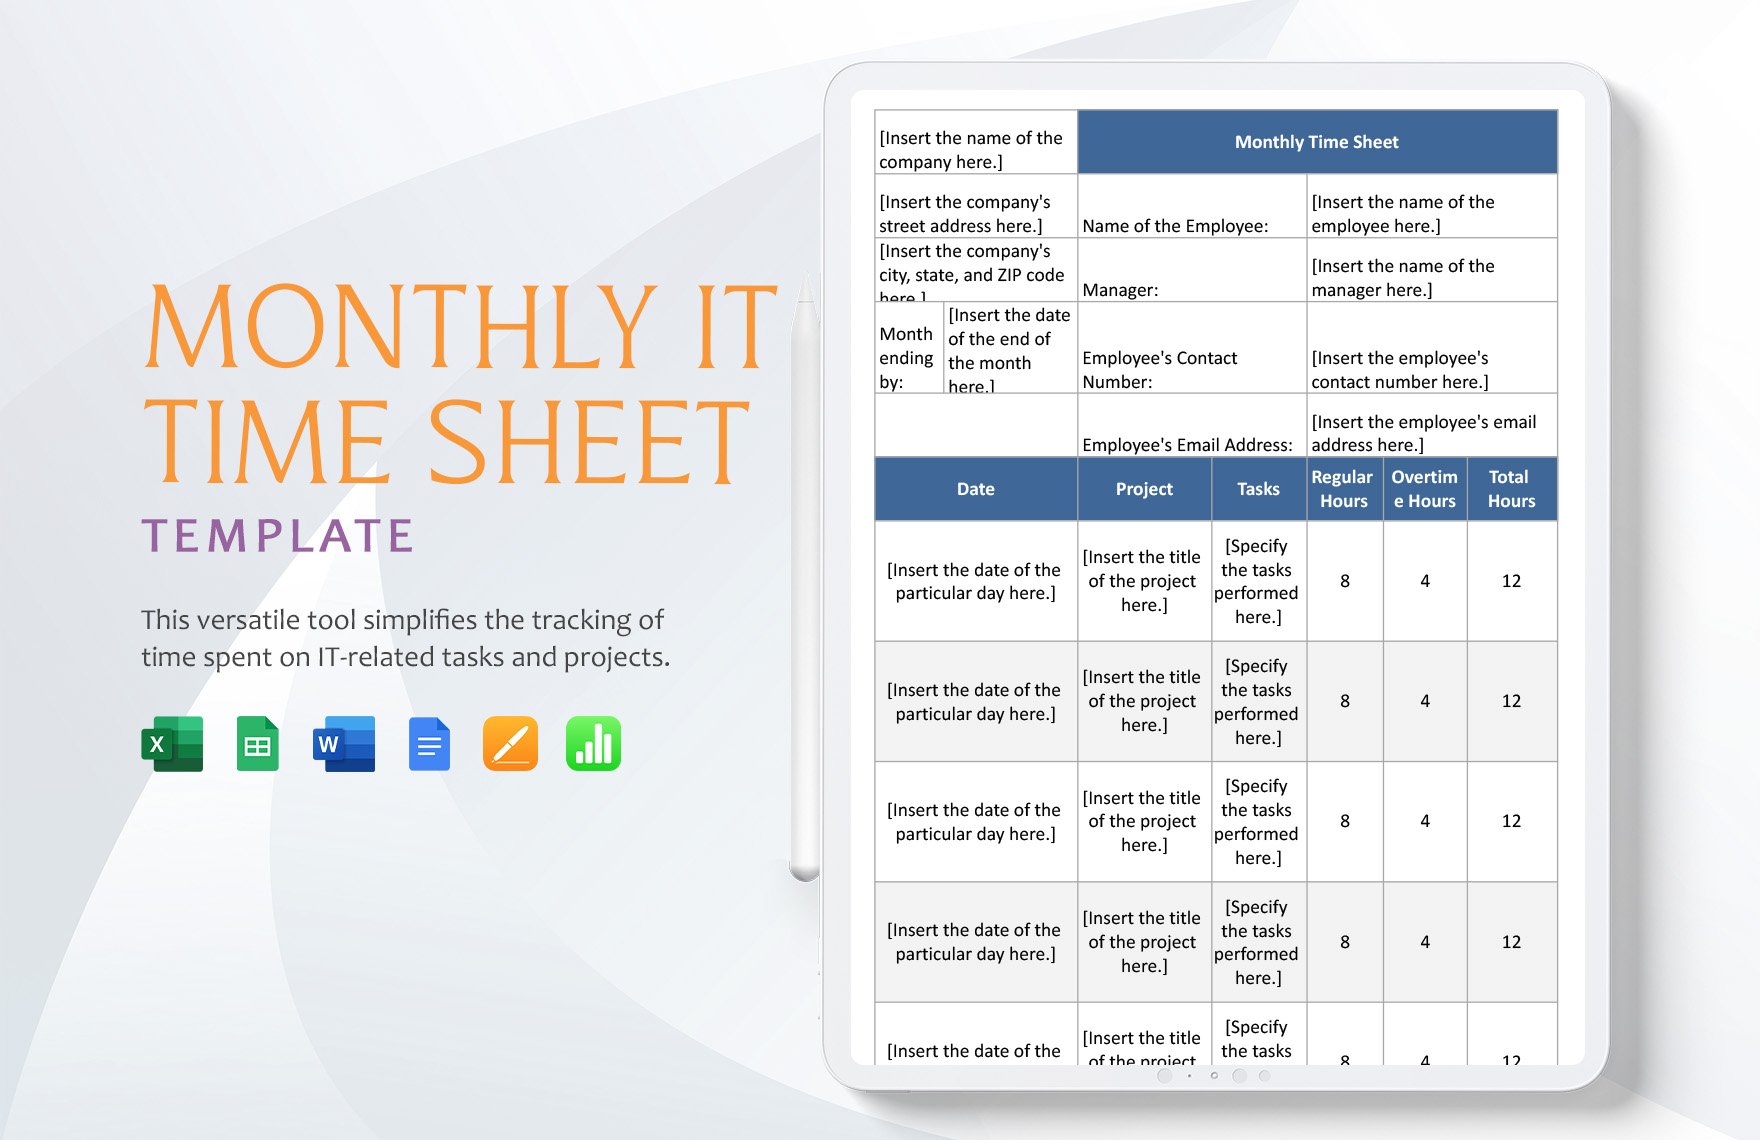 Monthly IT Time Sheet Template in Word, Google Docs, Excel, Google Sheets, Apple Pages, Apple Numbers